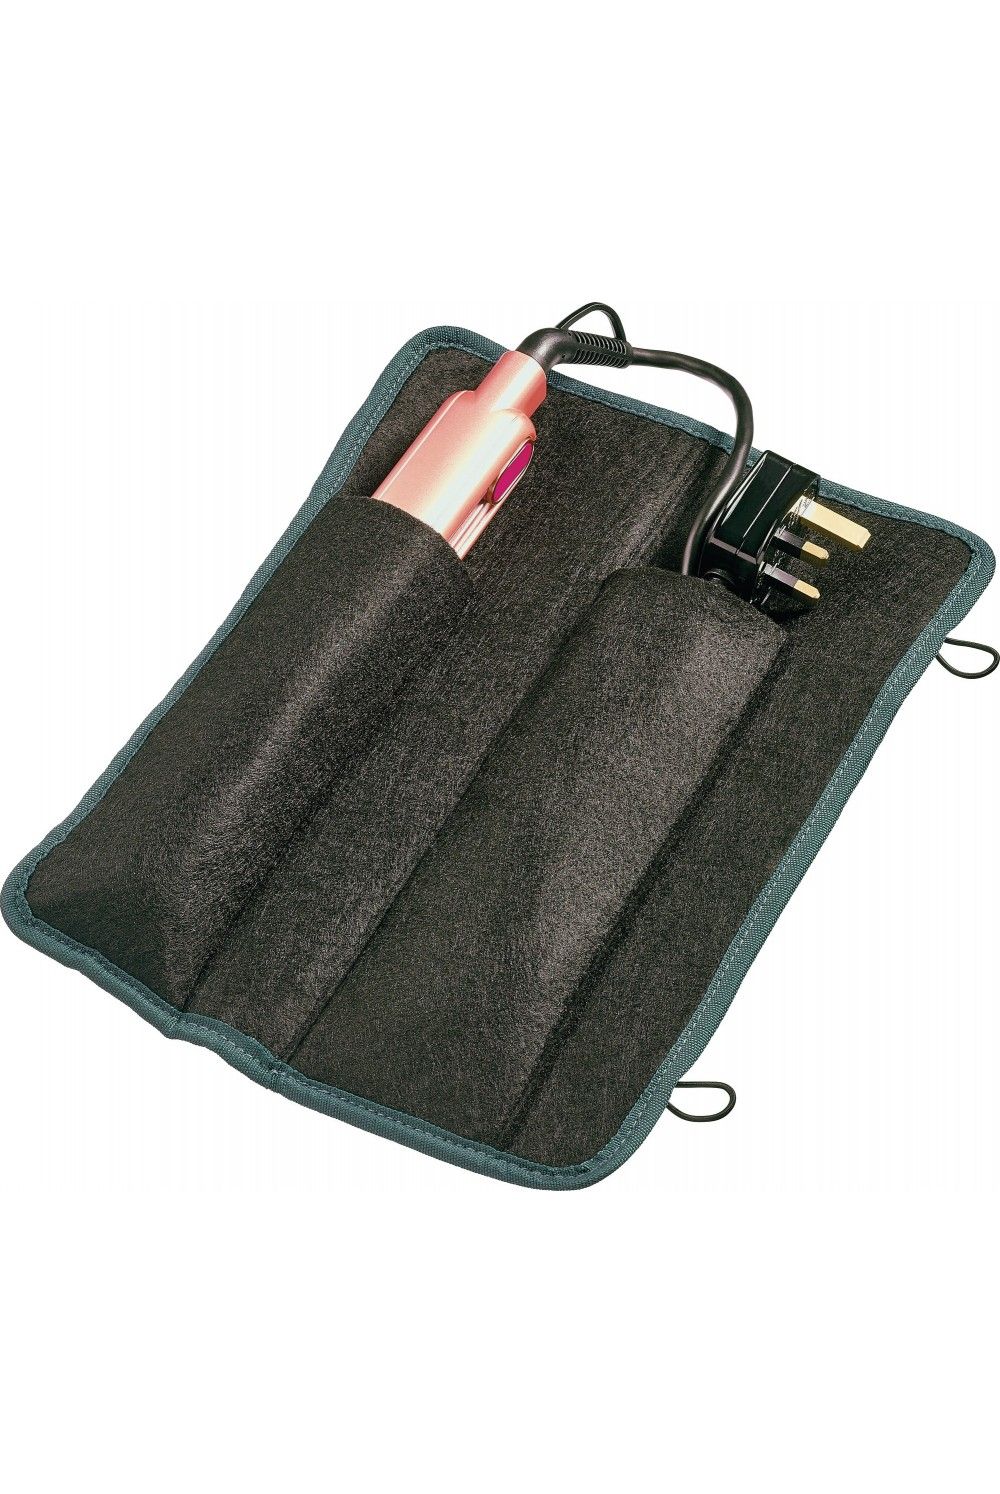 Go Travel Heat resistant case for hair styling devices